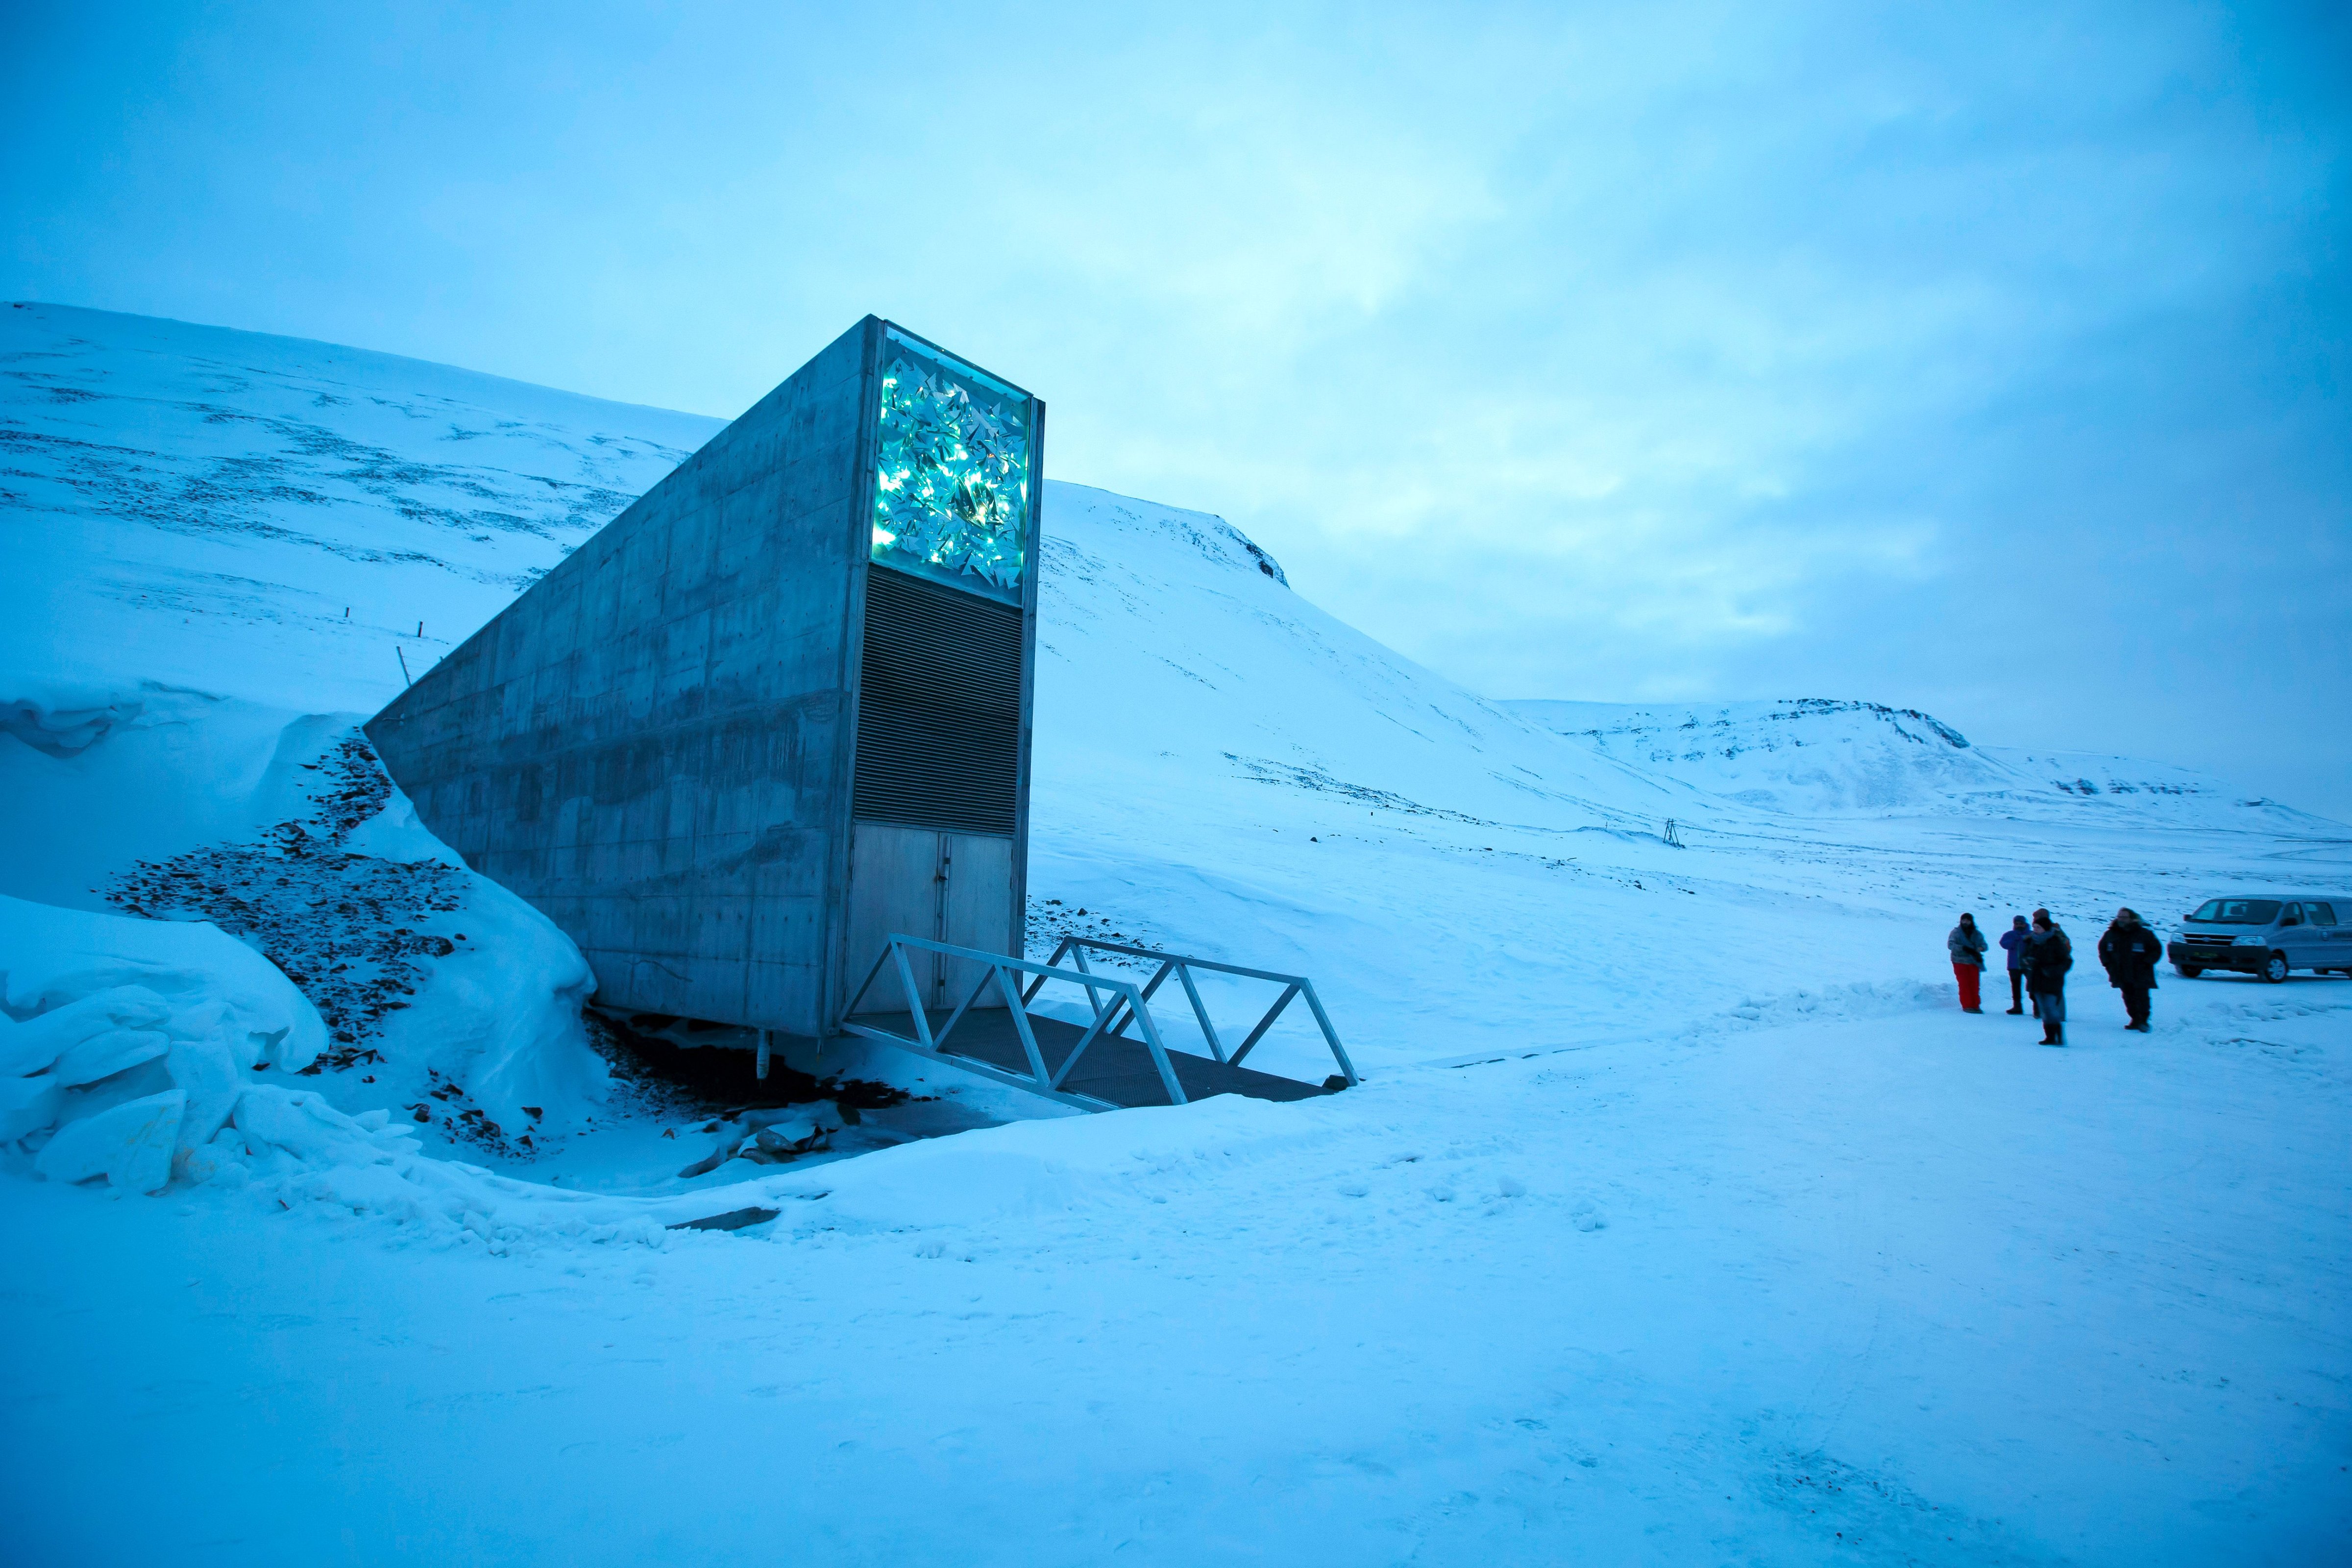 A general view of the entrance of the international gene bank Svalbard Global Seed Vault (SGSV), outside Longyearbyen on Spitsbergen, Norway, on February 29, 2016. (Junge Heiko—AFP/Getty Images)